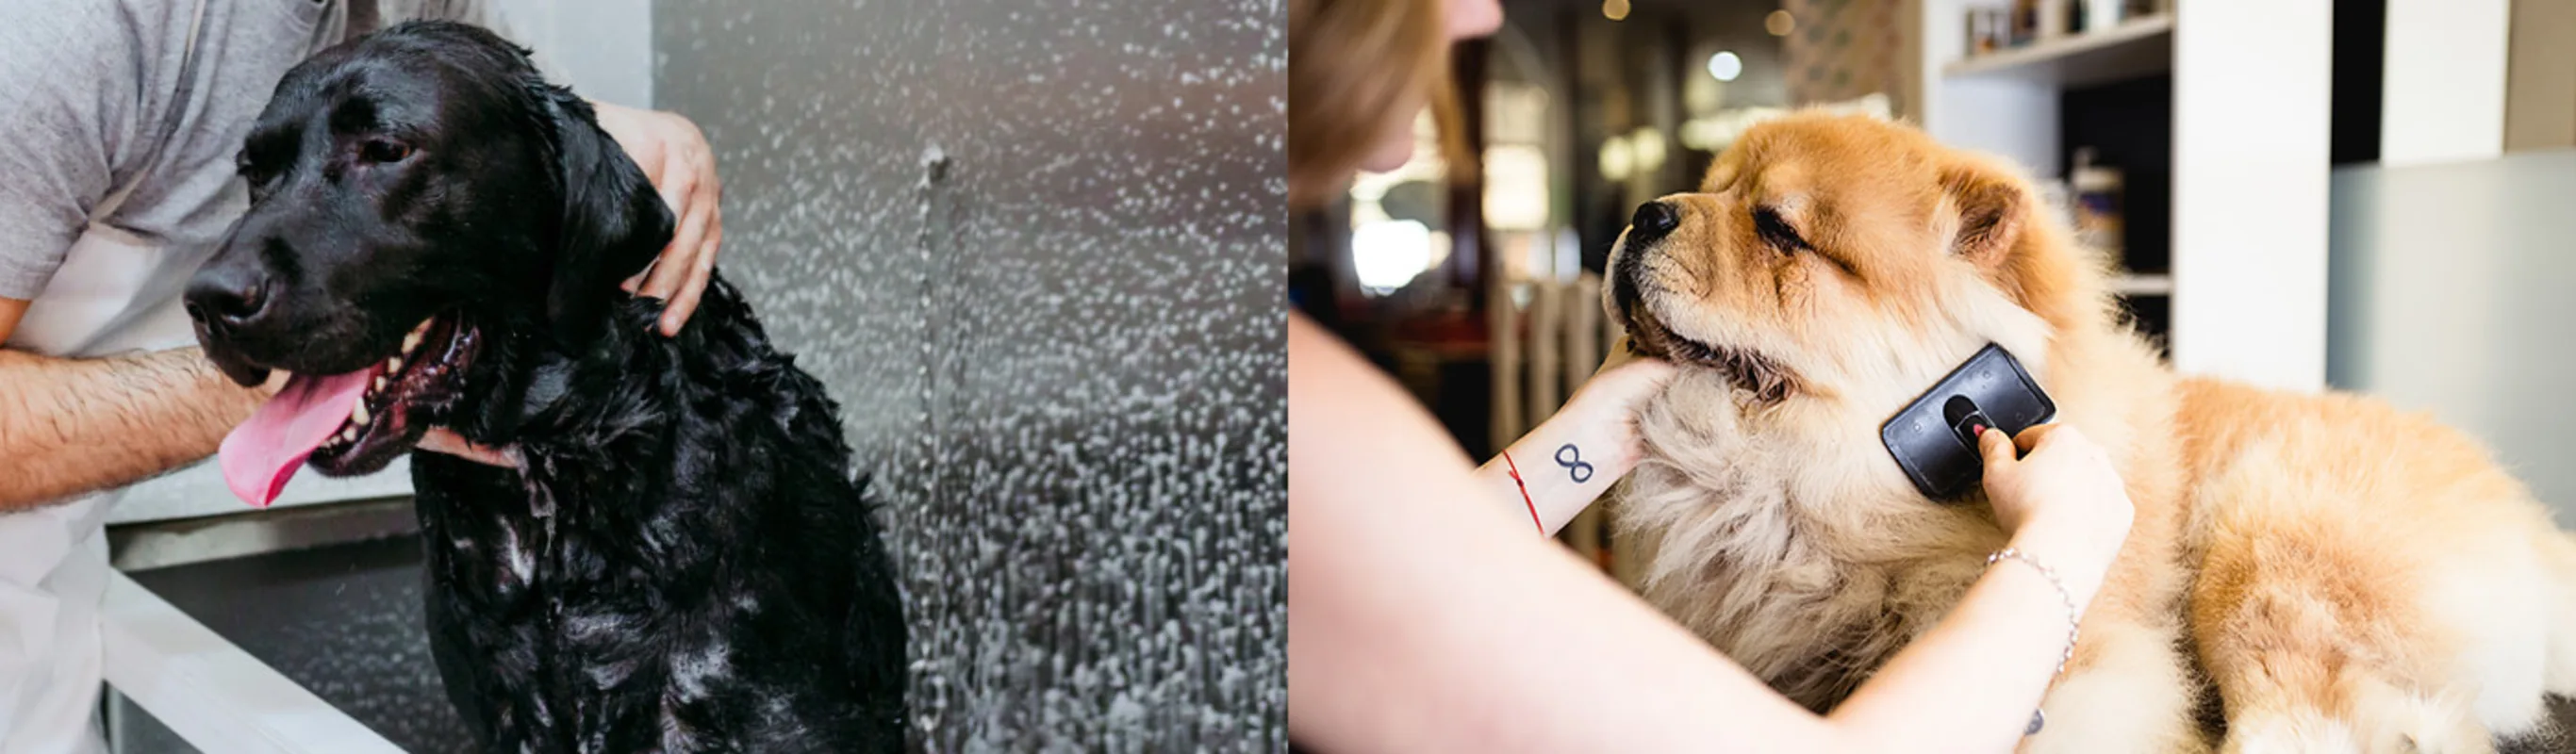 Left Image is a groomer washing a black labrador dog and the right image is a groomer trimming some fur of a small dog's face